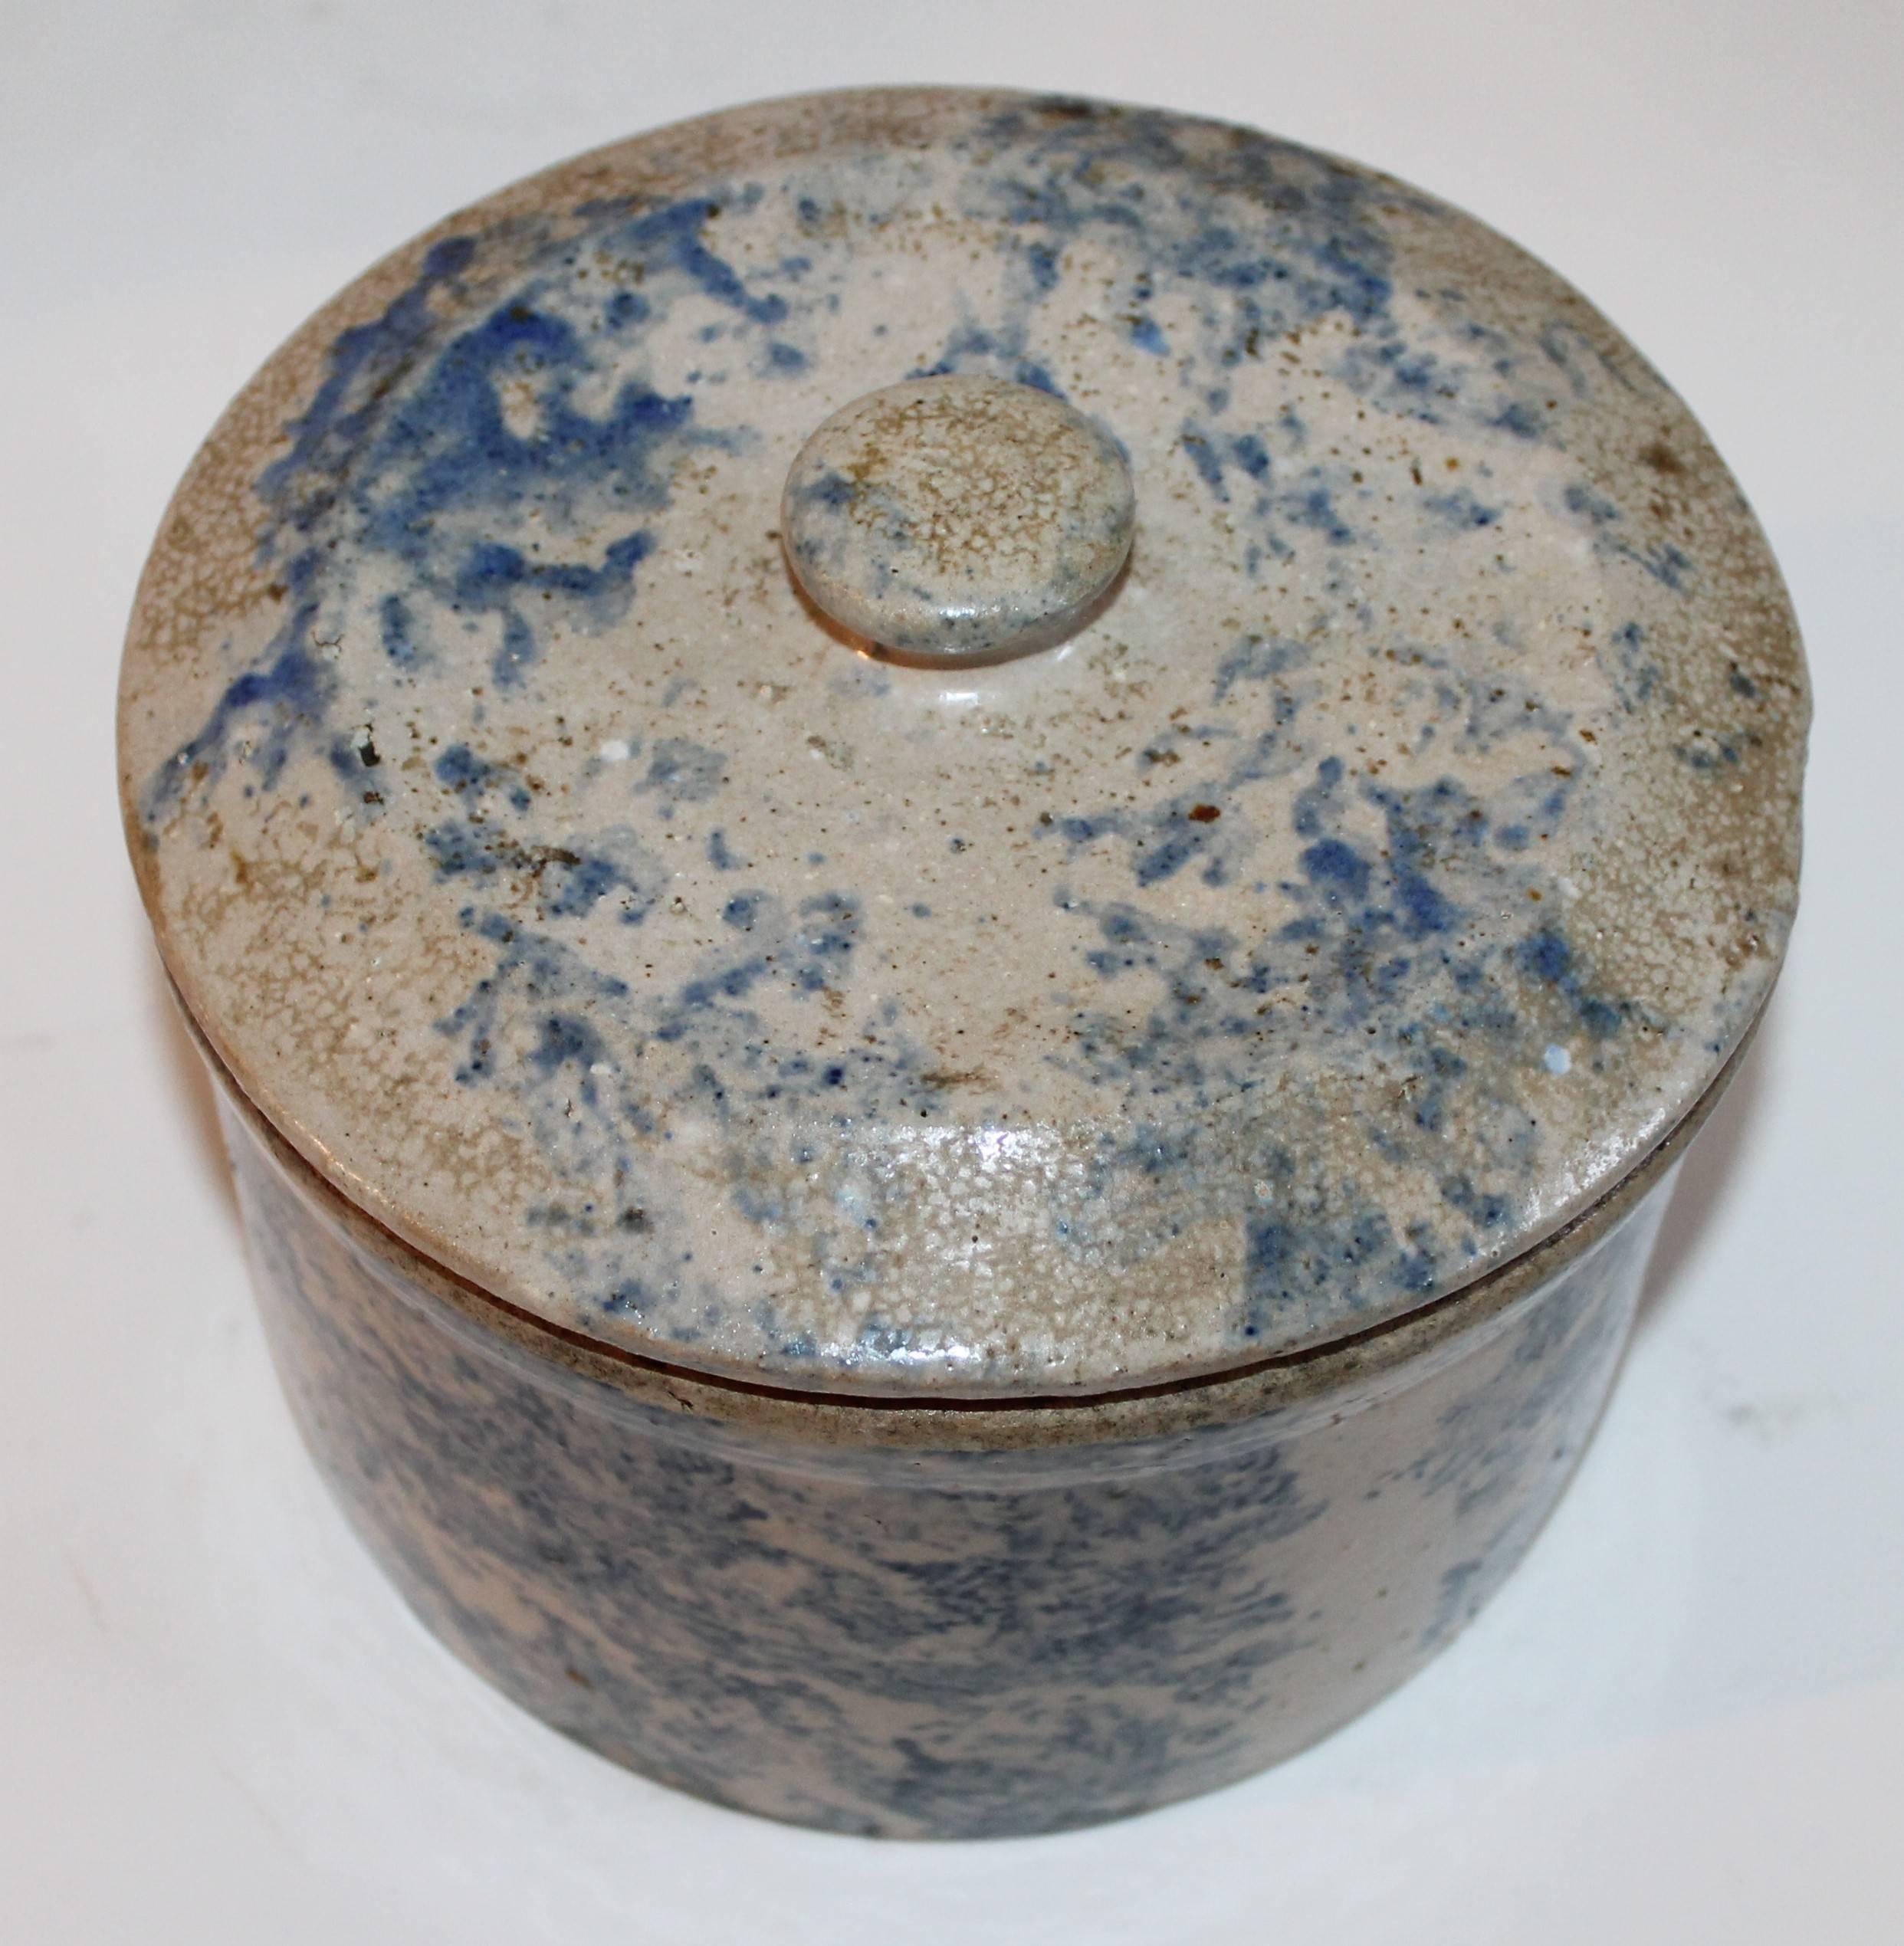 This very rare 19th century sponge decorated salt crock has the original lid and in very good condition. Most unusual salt glaze surface.